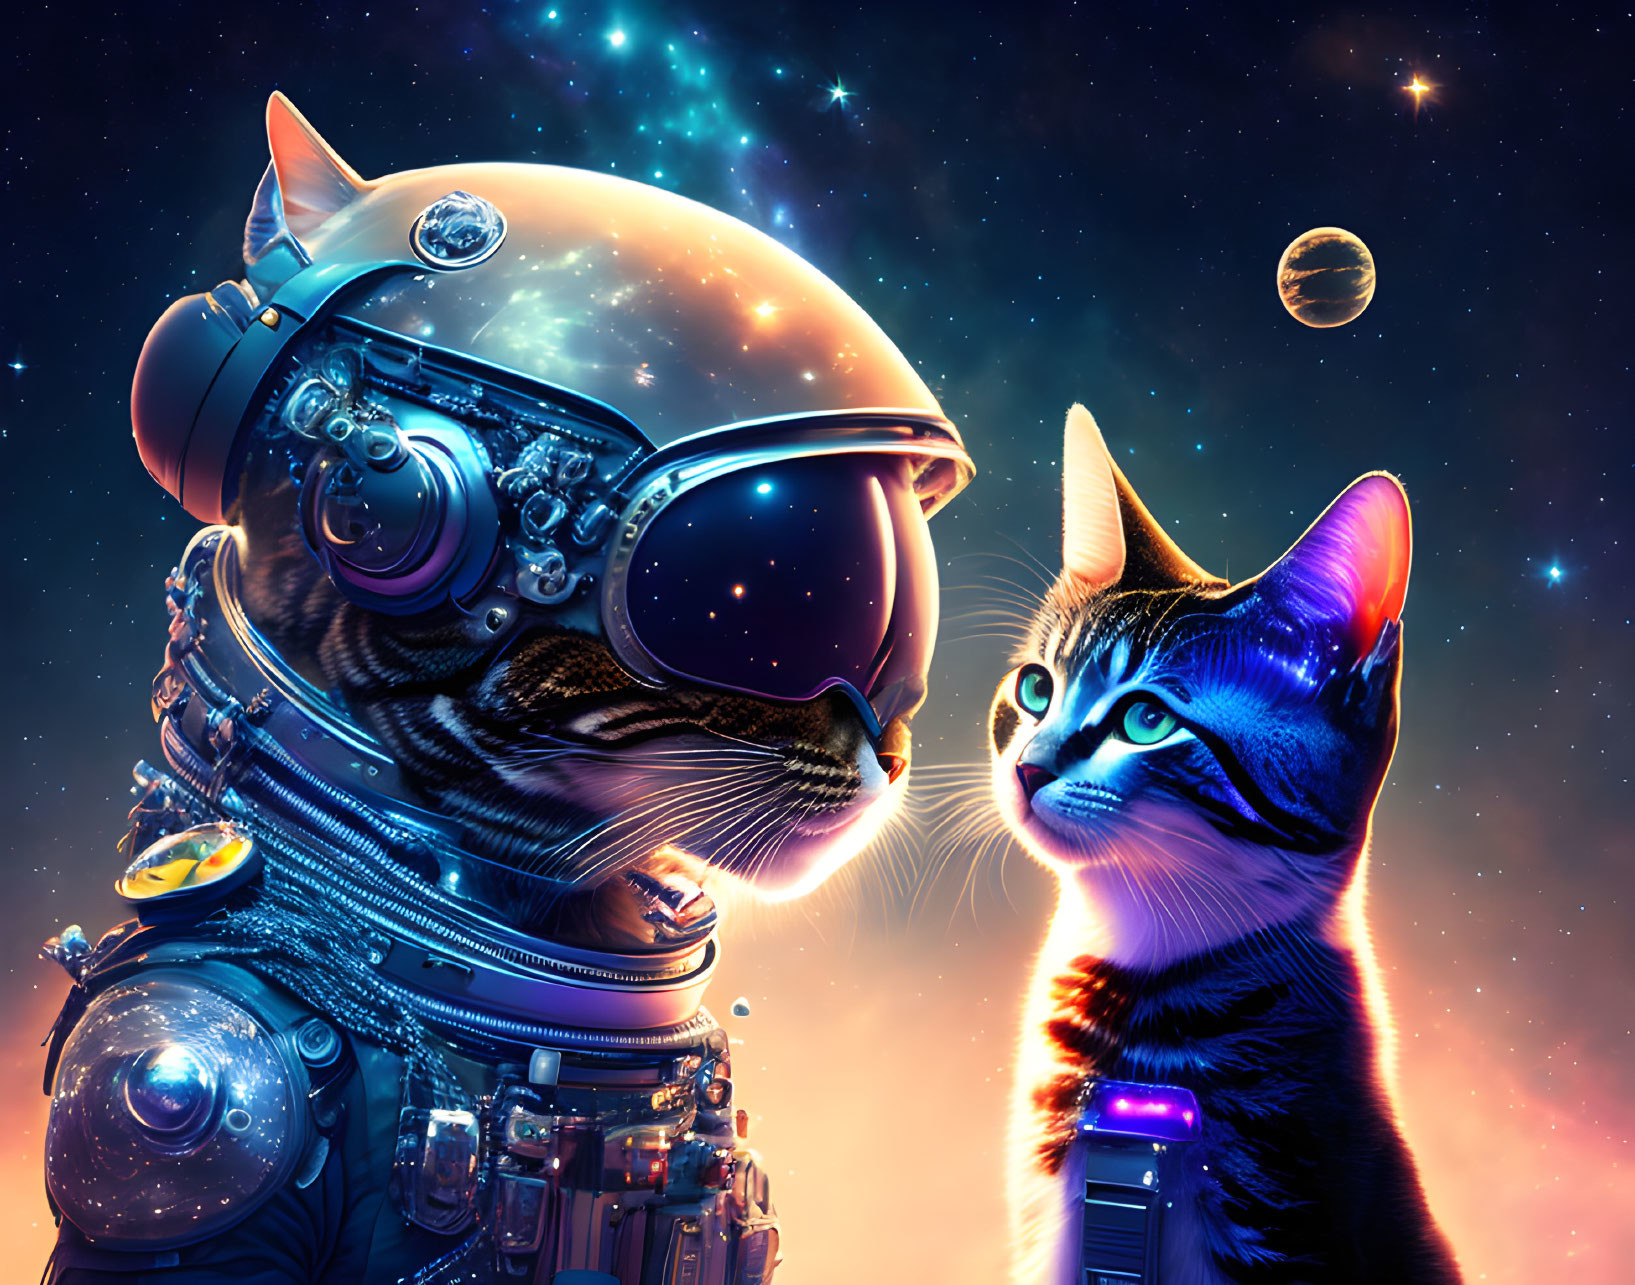 Astronaut and cat in reflective space suit against cosmic backdrop